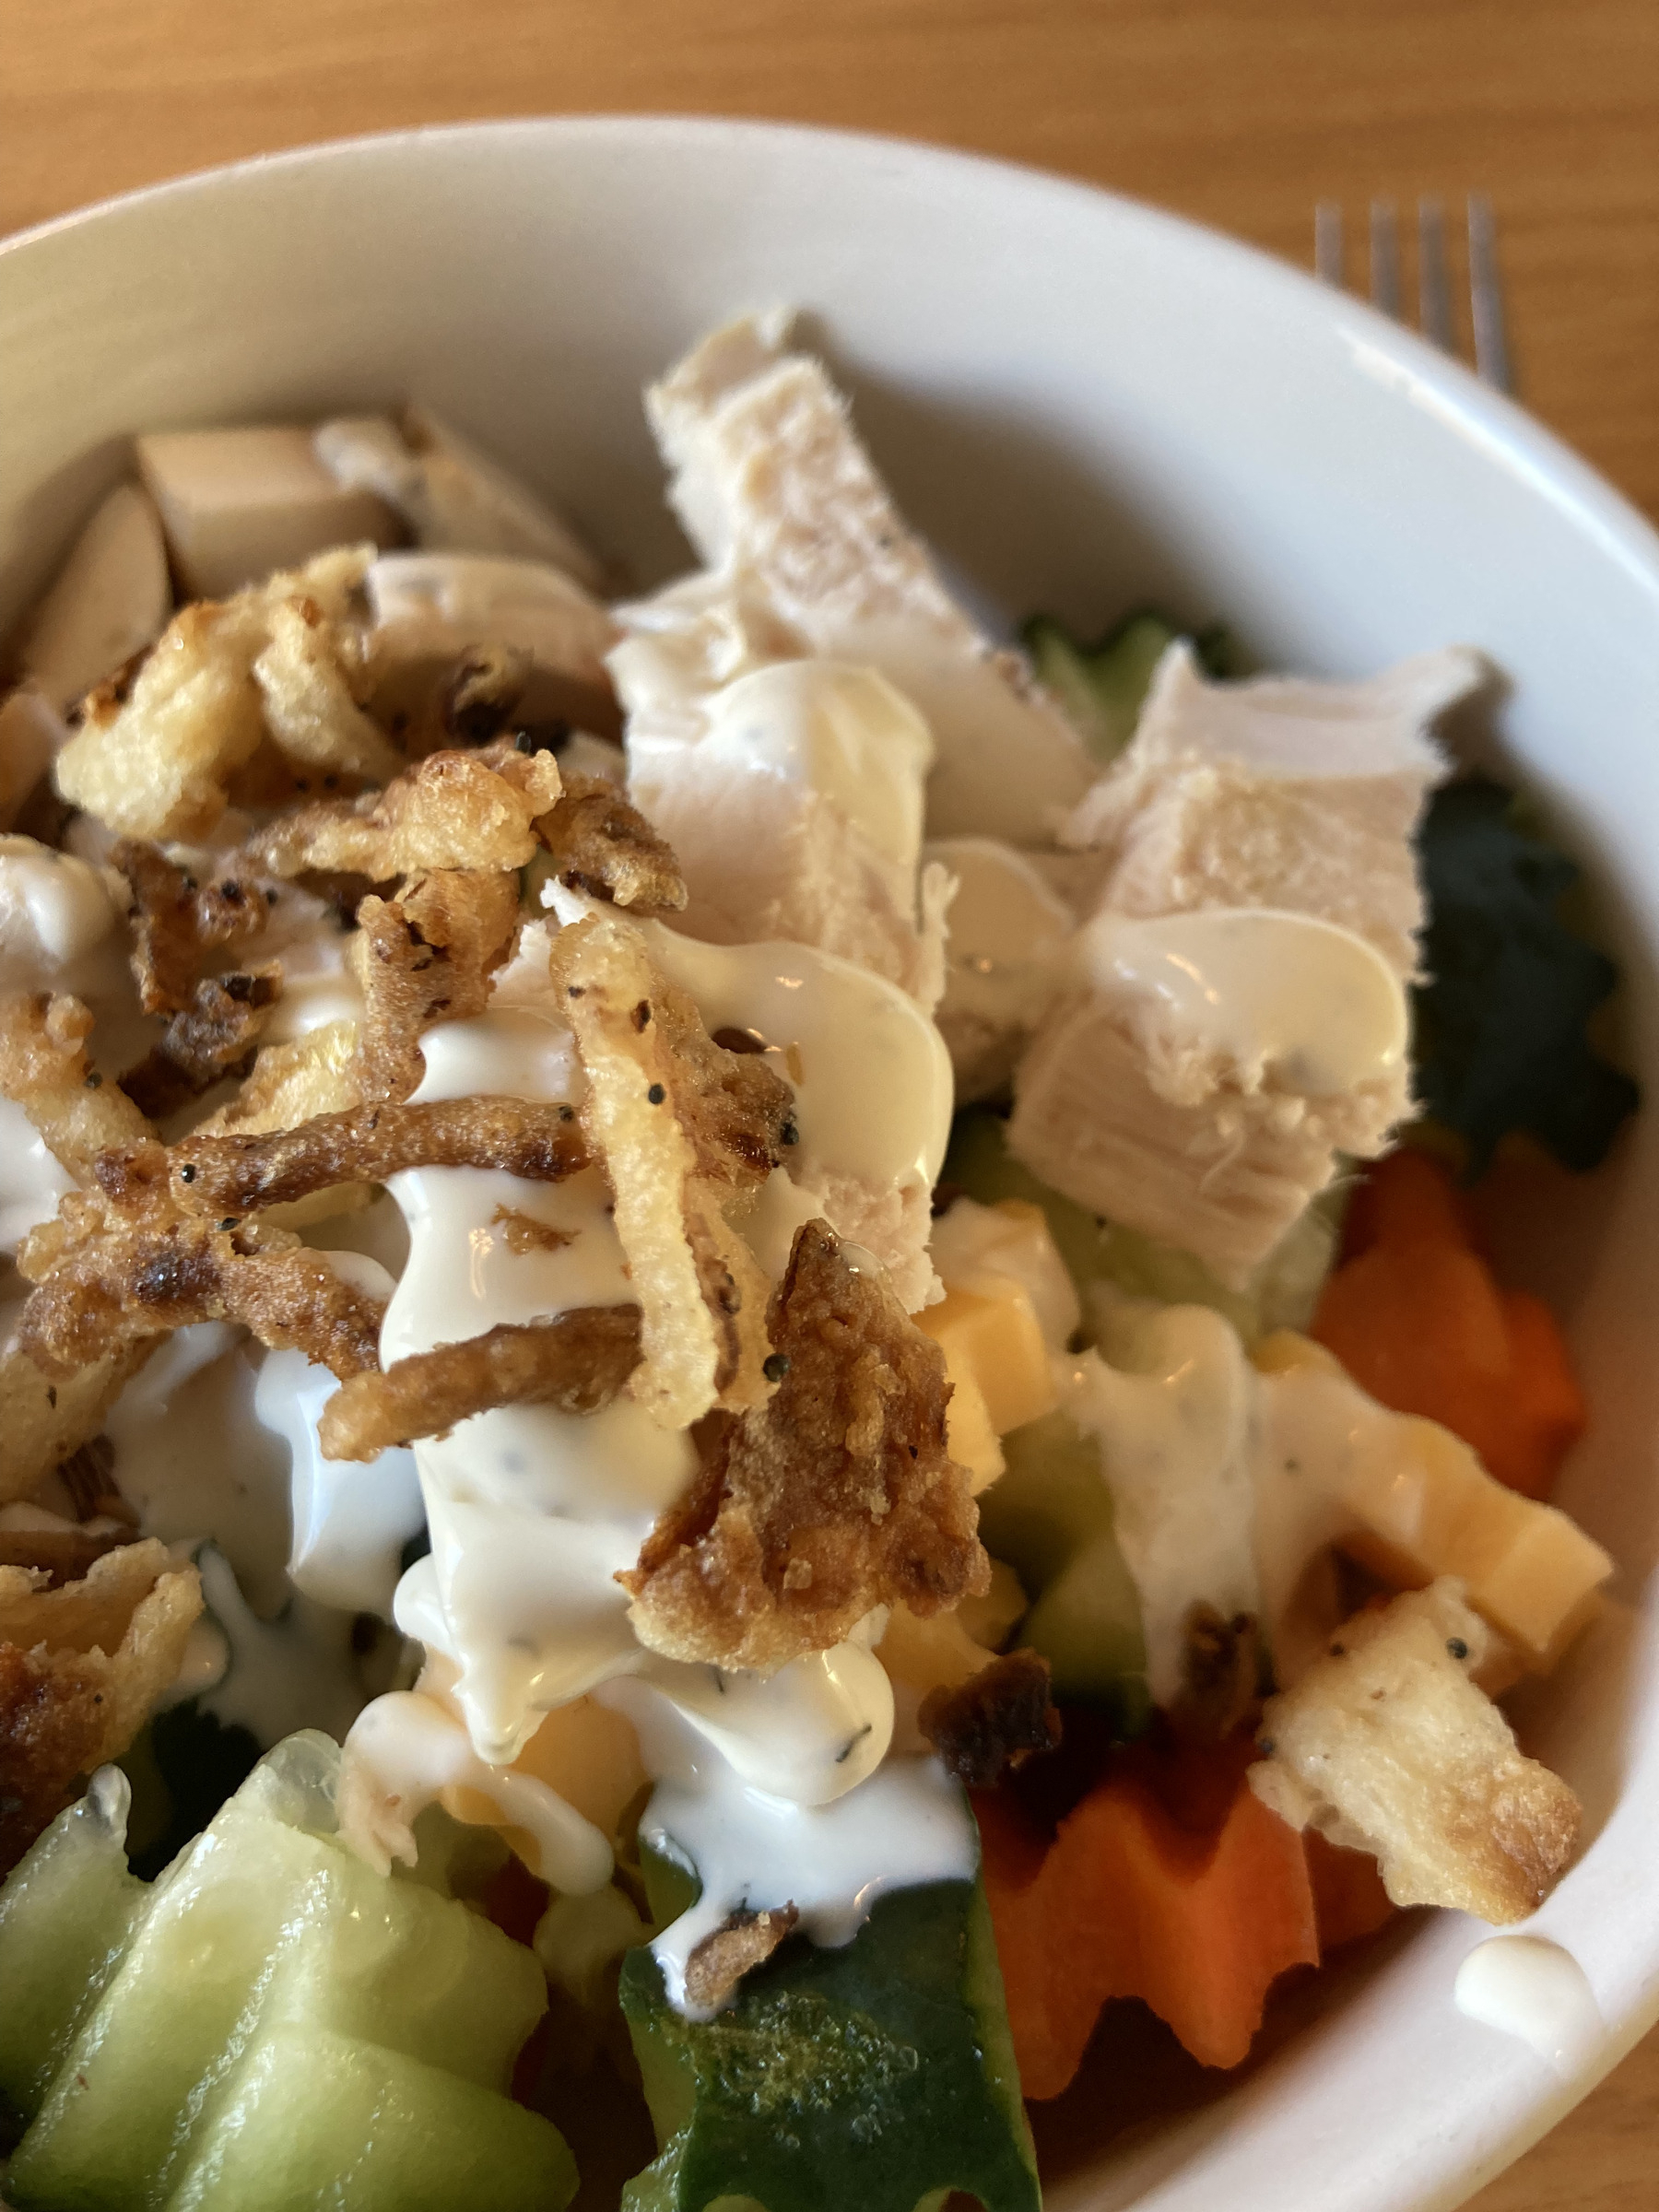 Salad of lettuce, cucumber, carrot, chicken, fried onions, and ranch dressing.